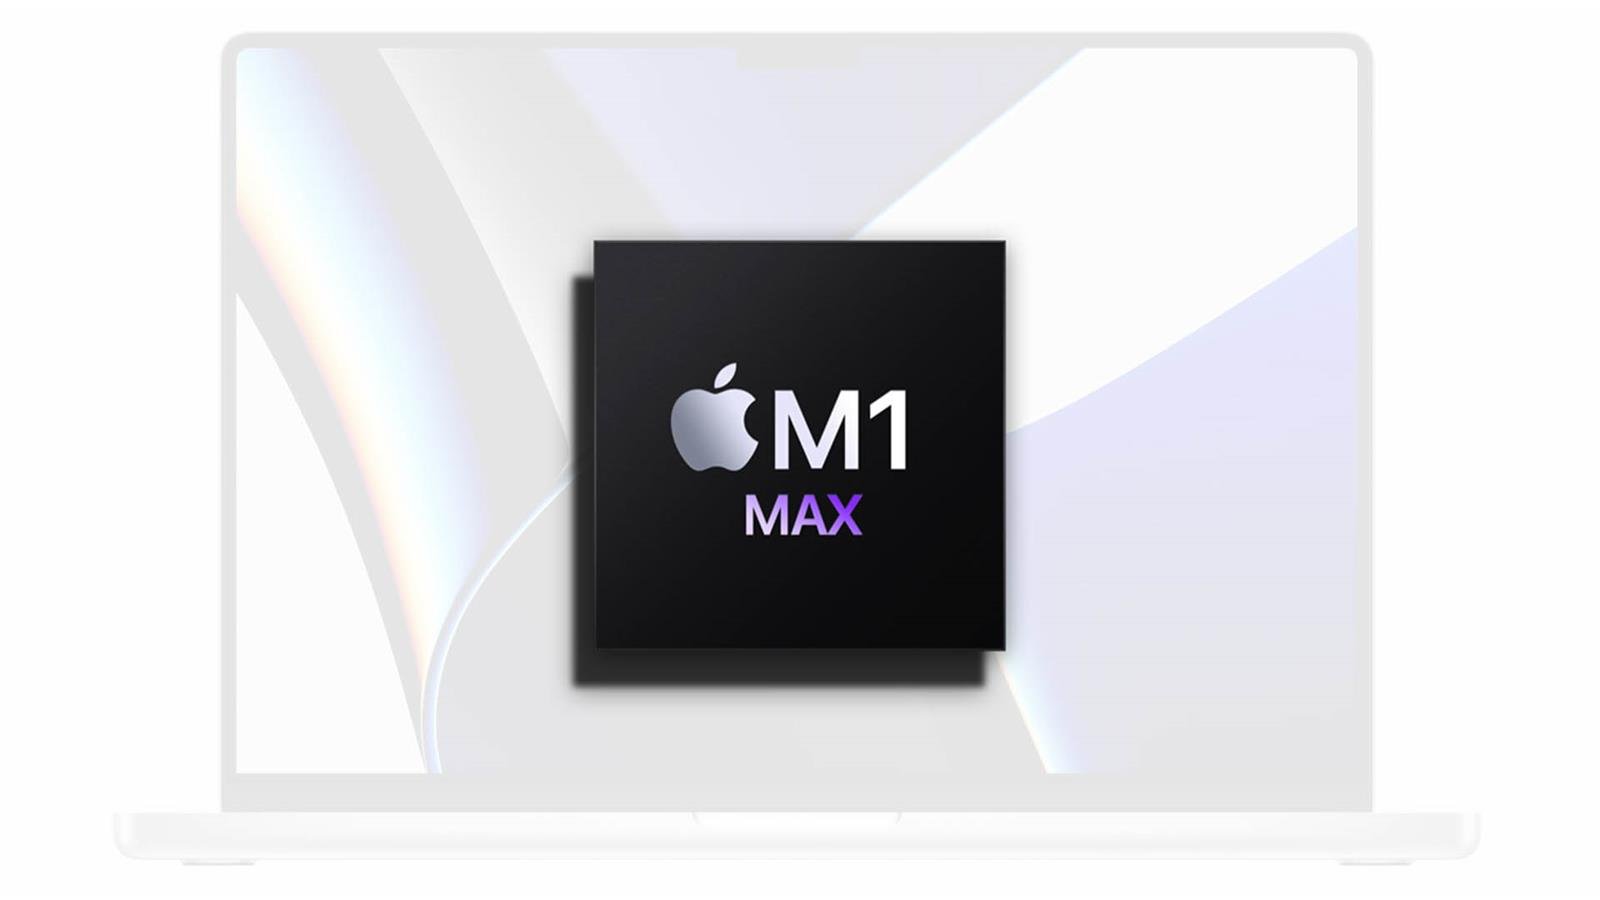 3nm and up to 40 cores.  Apple's upcoming SoC will bet on two matrices